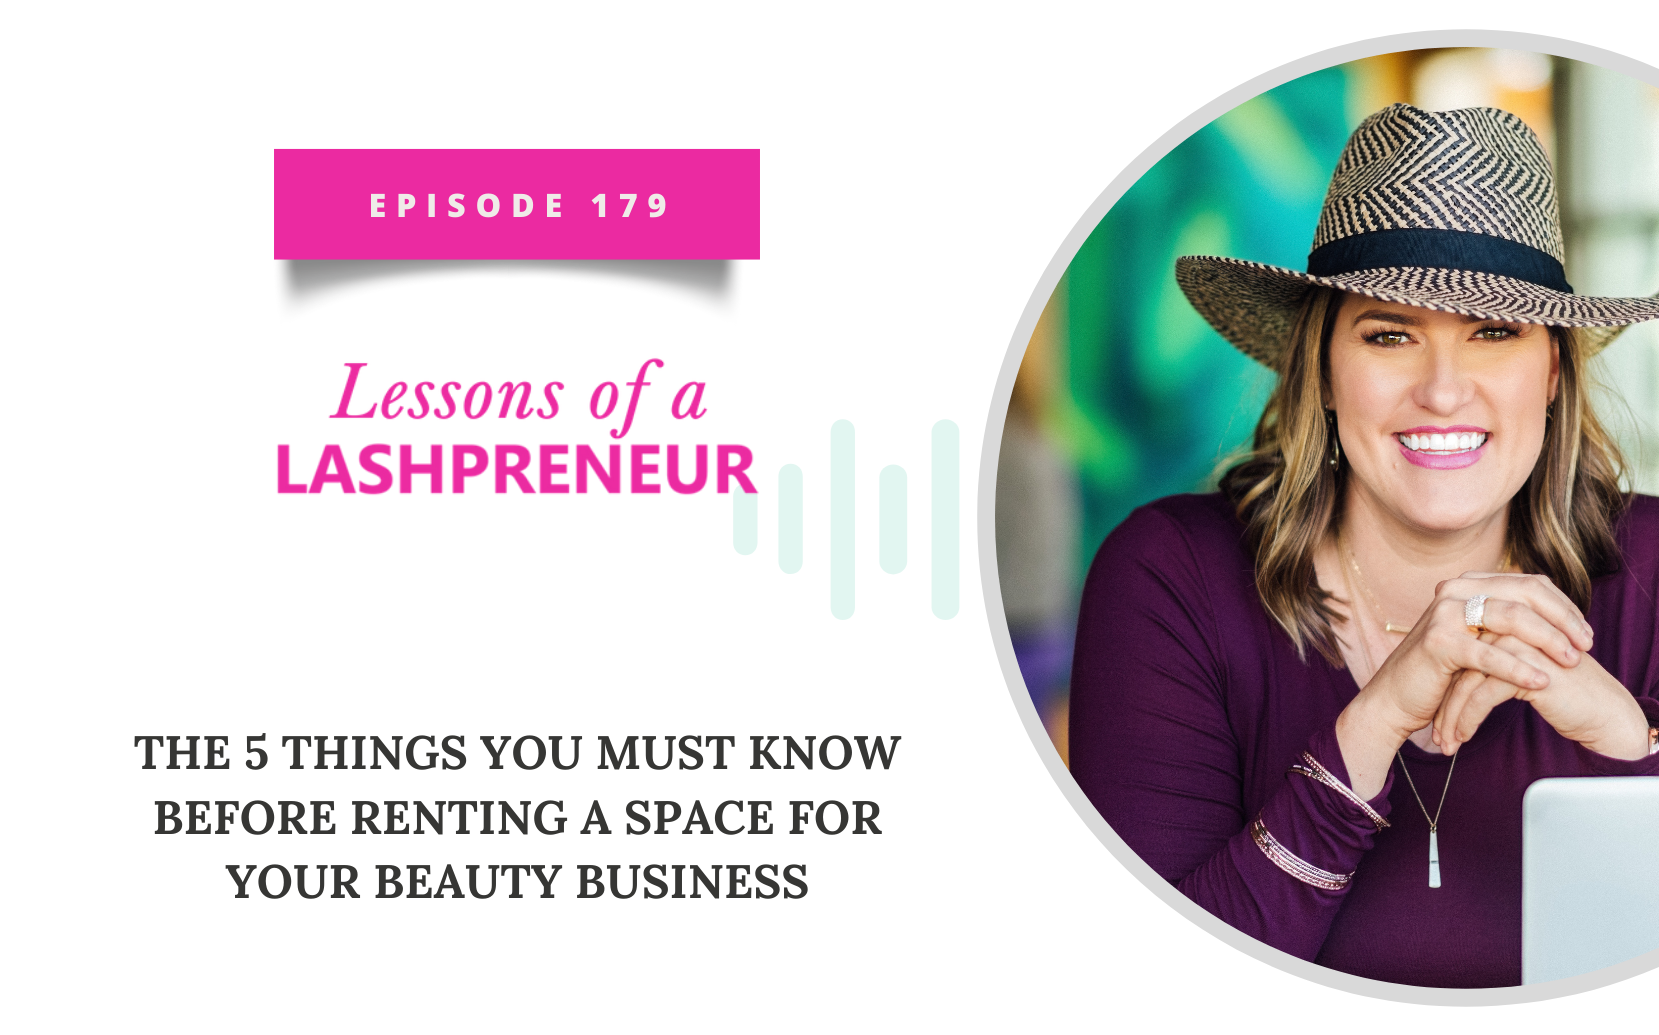 The 5 Things You MUST Know Before Renting a Space for your Beauty Business